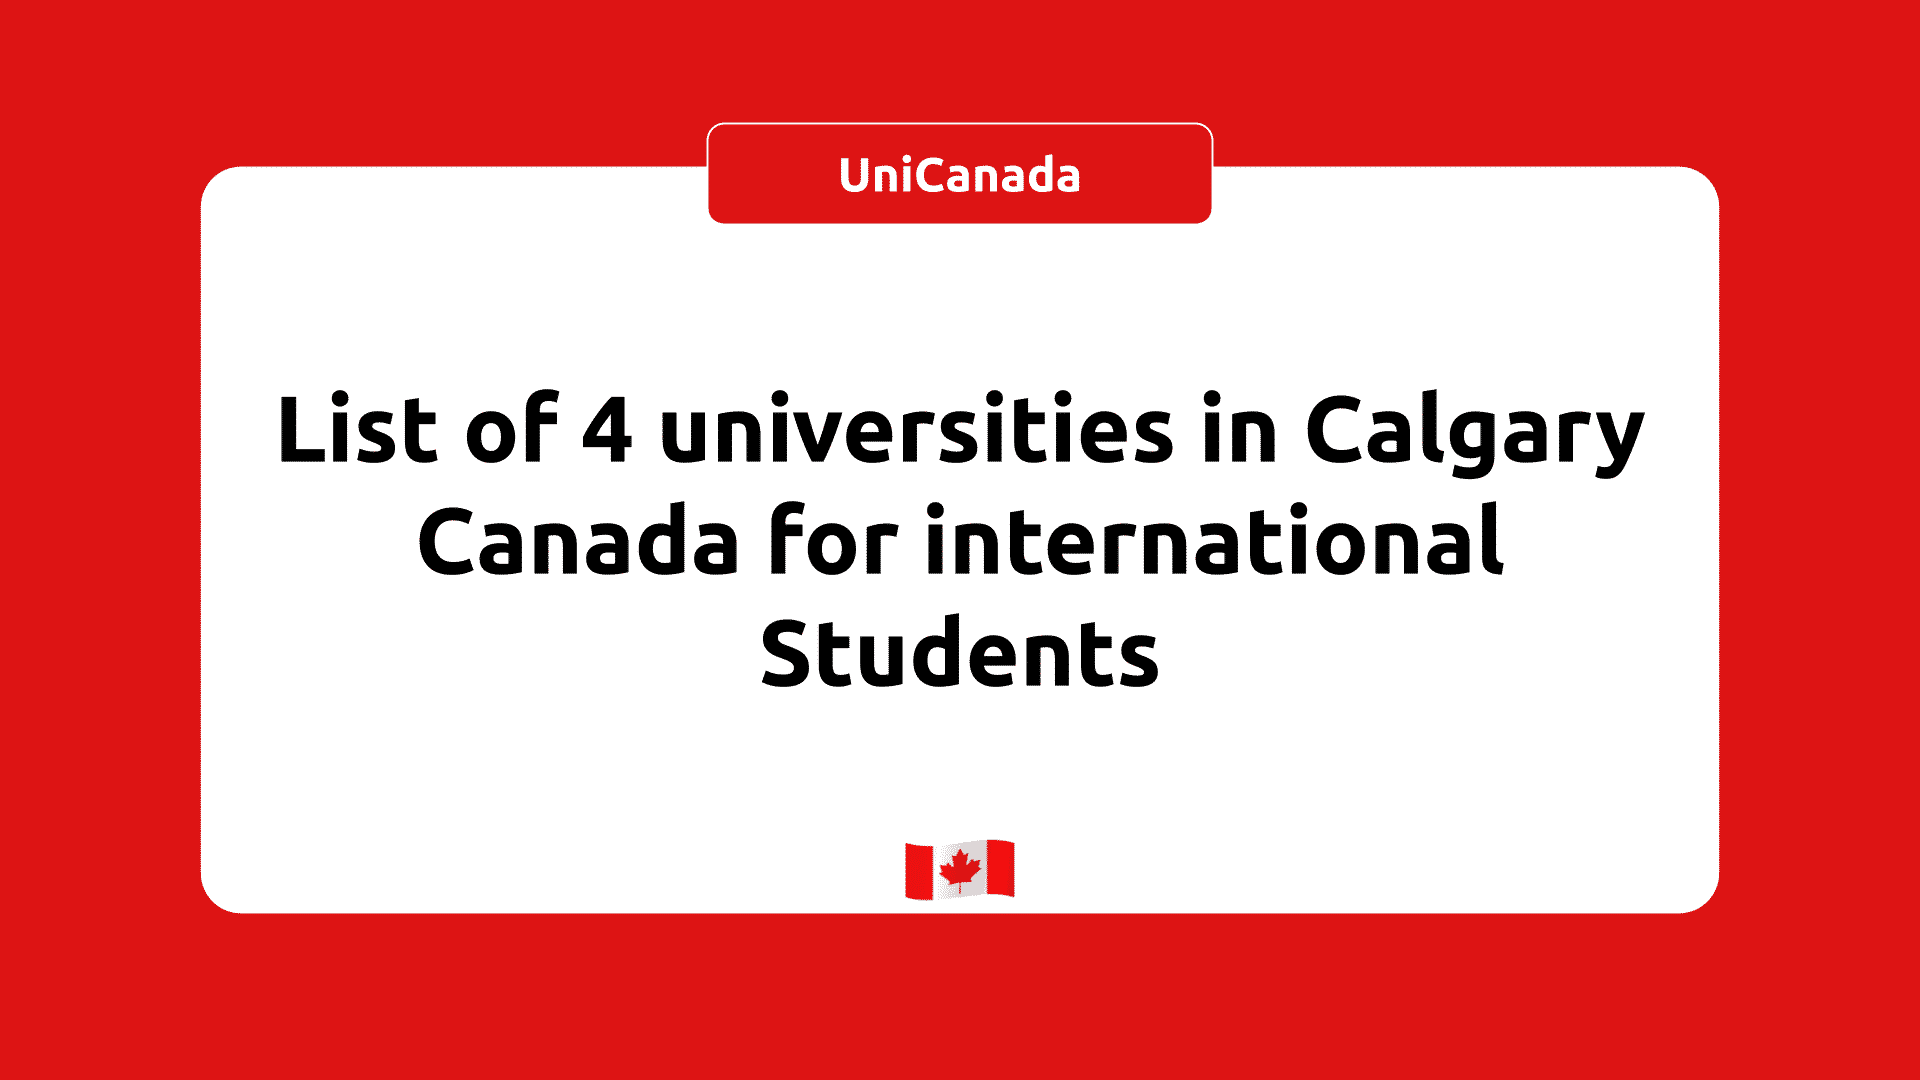 List of 4 universities in Calgary Canada for International Students